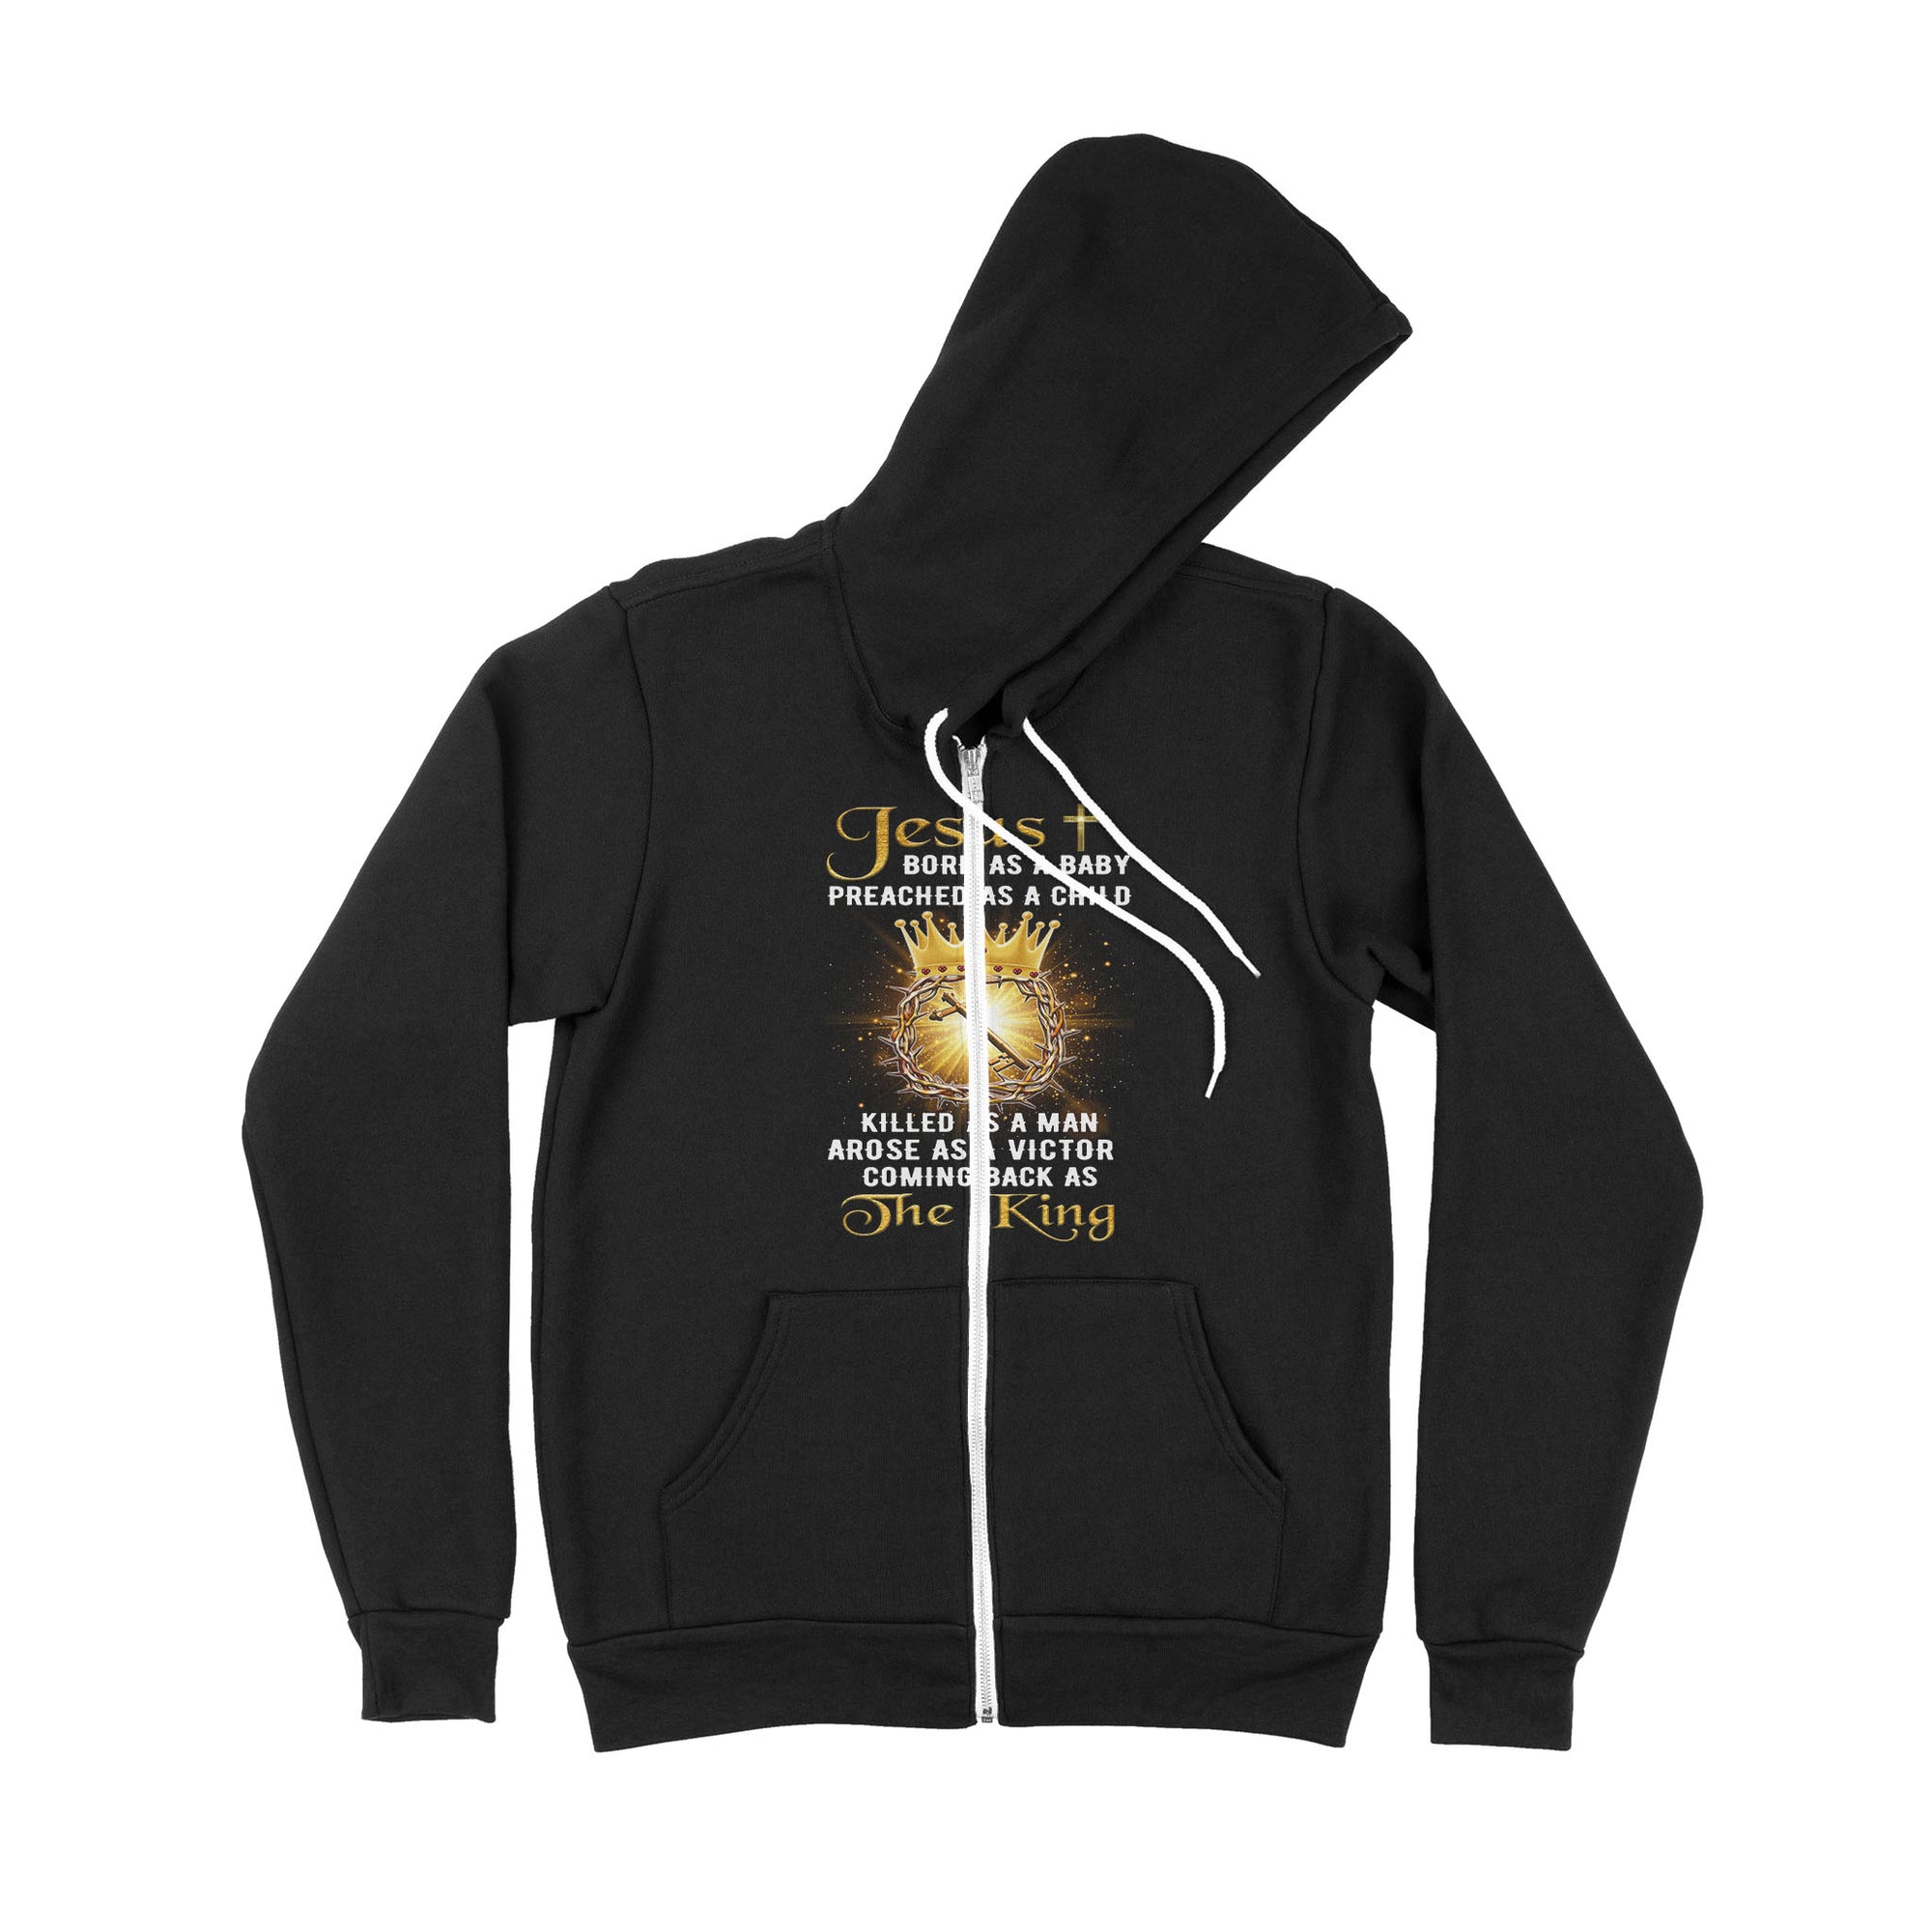 Jesus Born As A Baby Preached As A Child Coming Back As The King - Premium Zip Hoodie